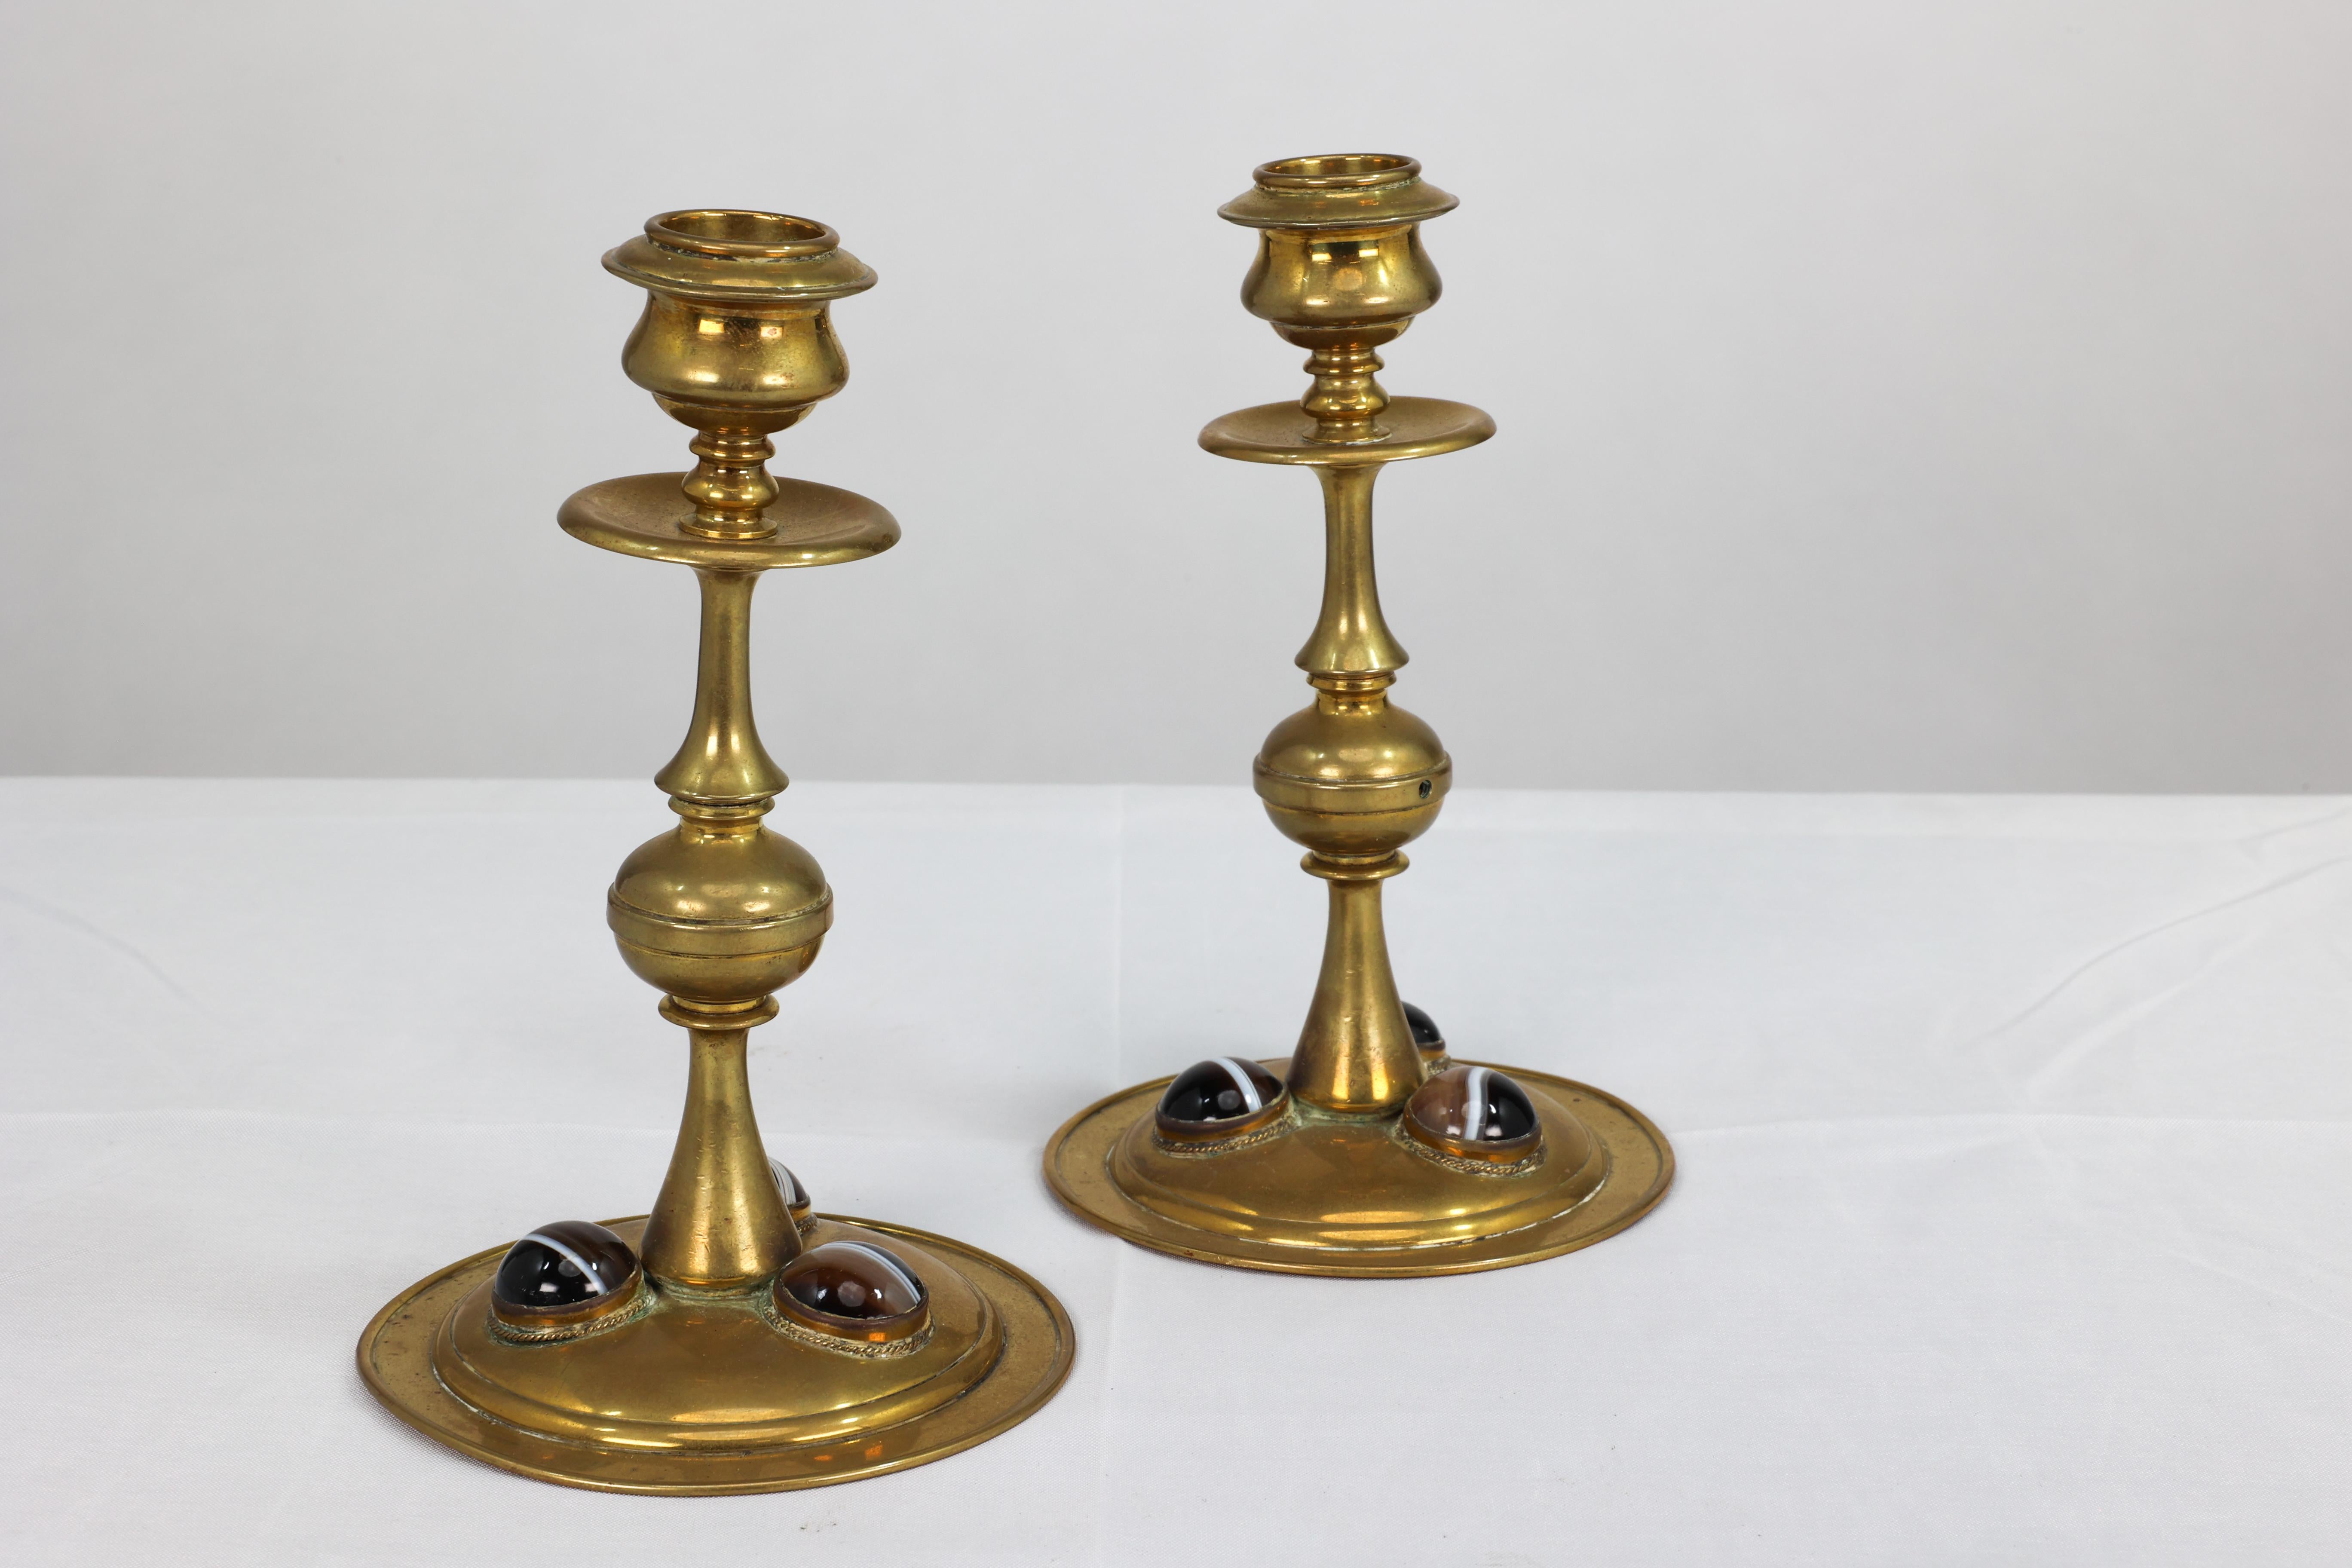 English Gothic Revival brass desk set with a pair of candlesticks & a matching pen tray. For Sale